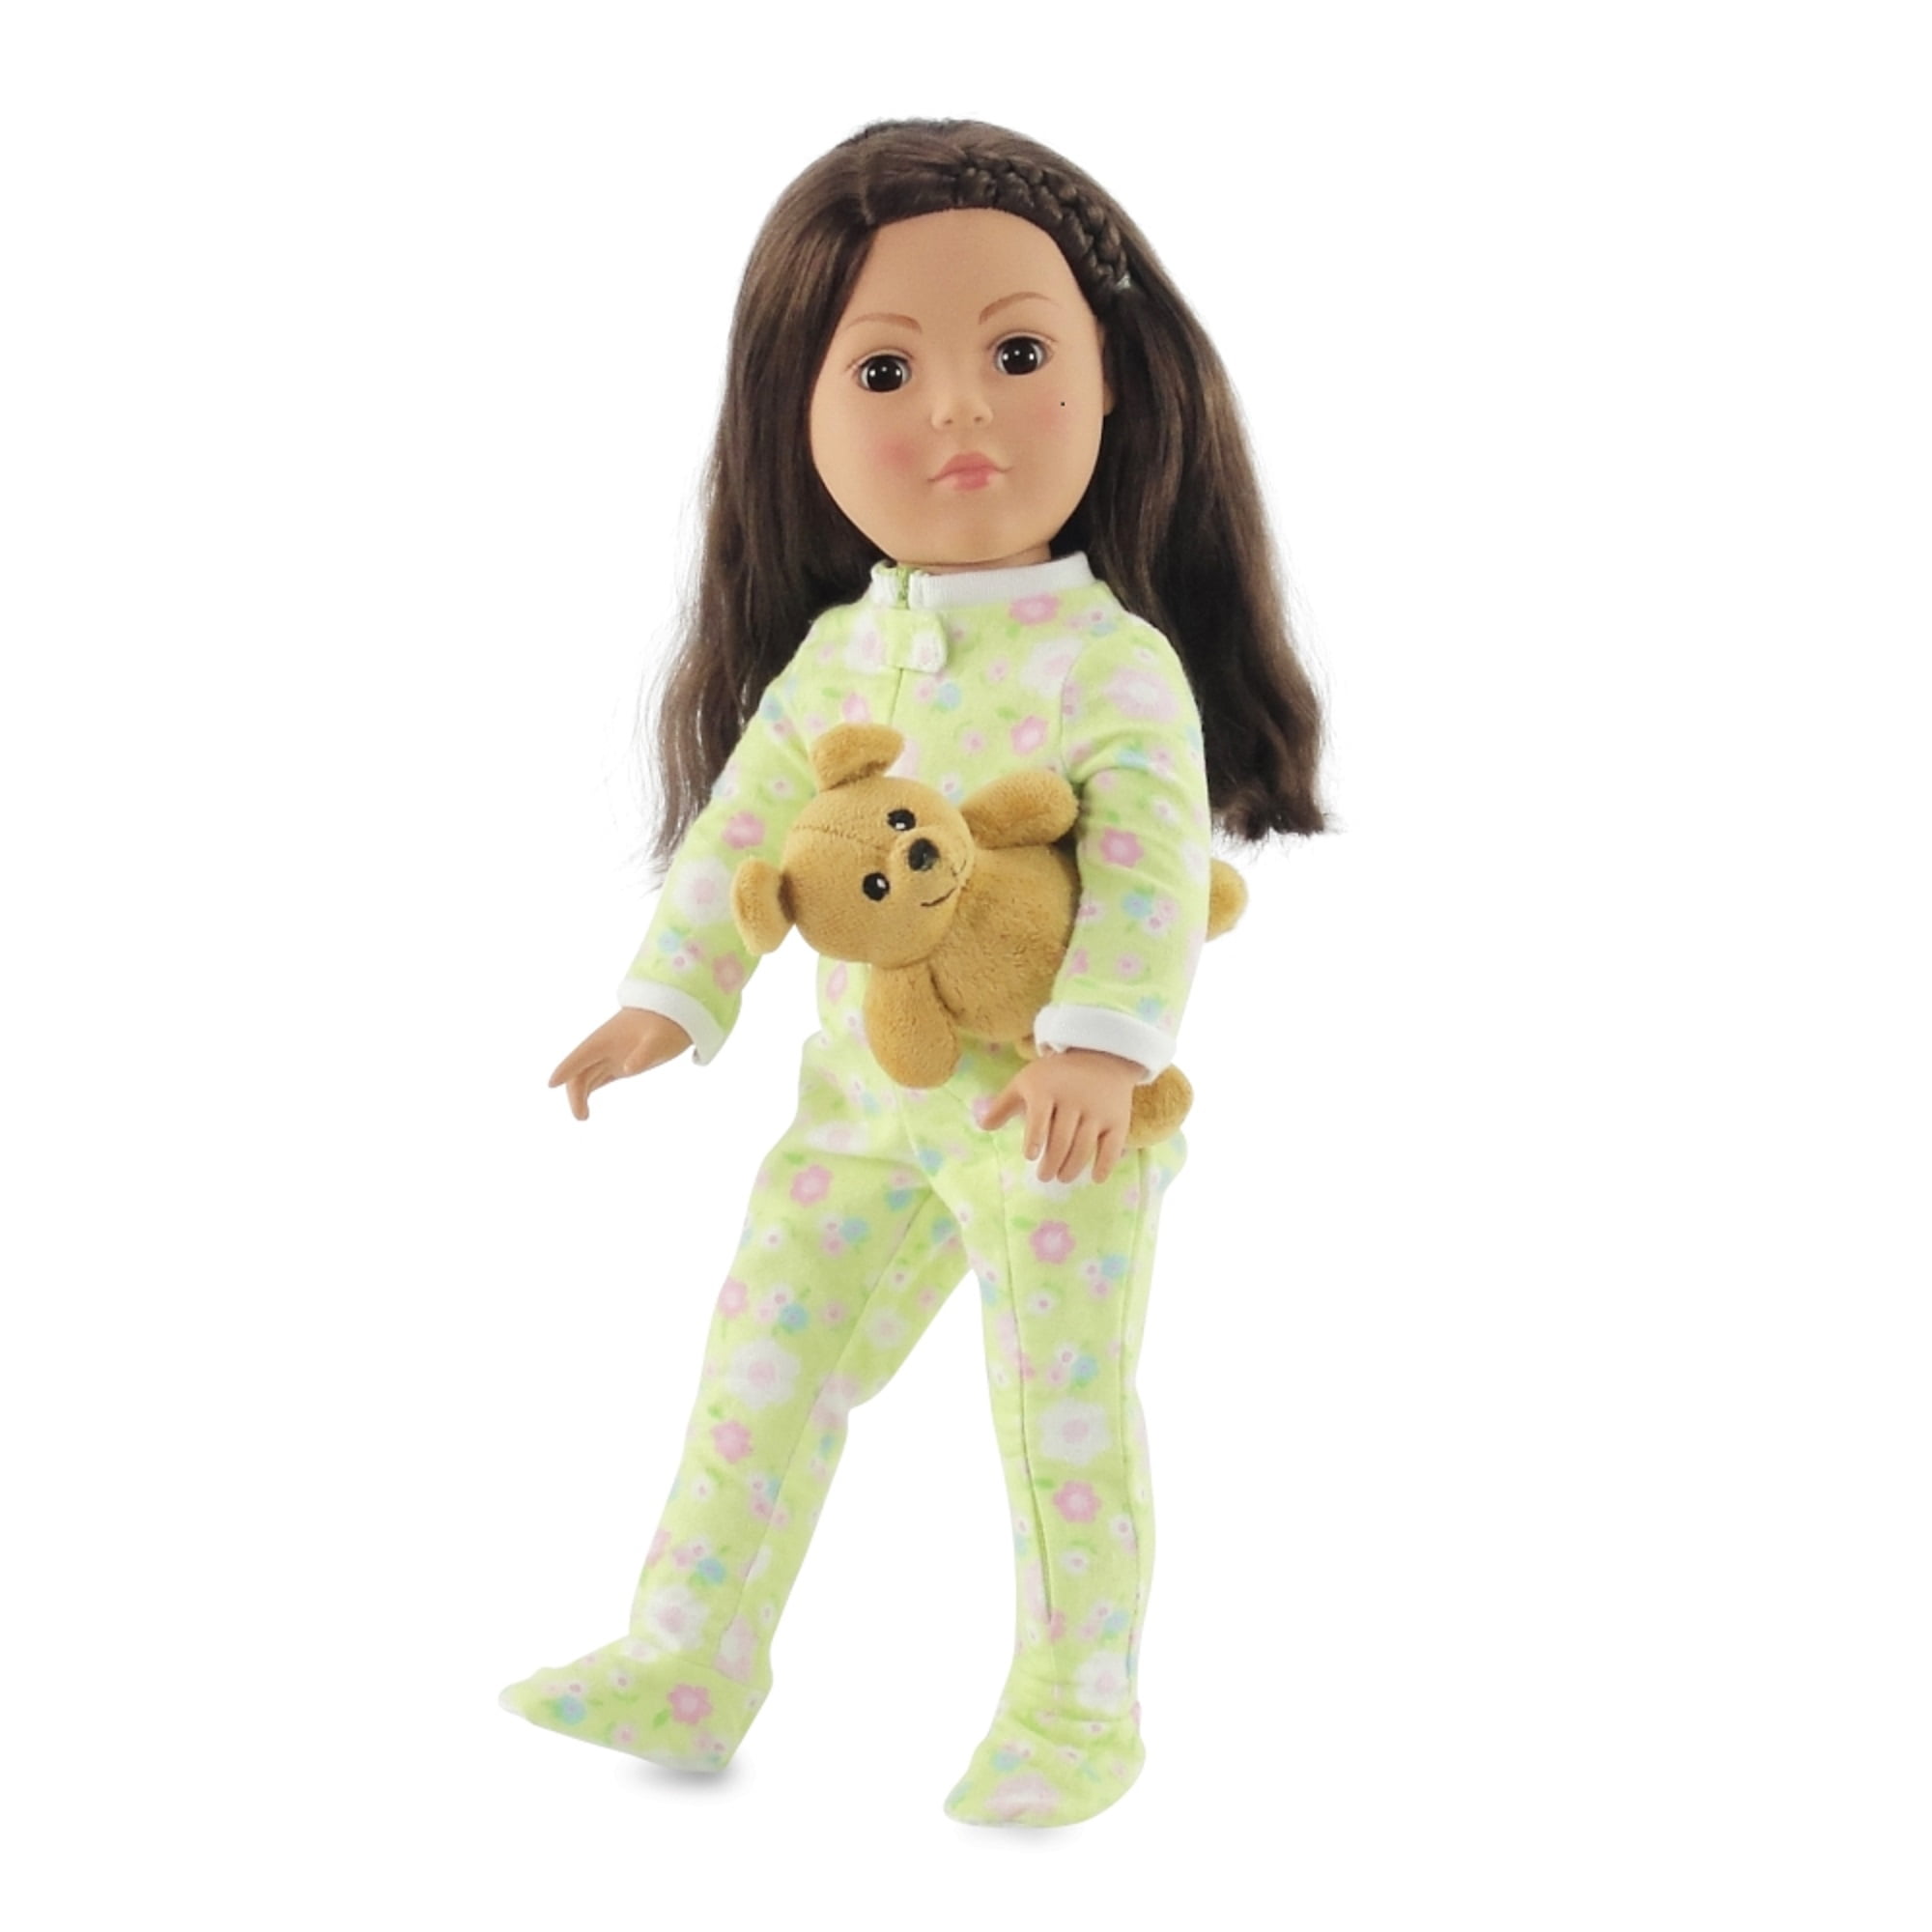 6-7" Doll Clothes-fit Mini American Girl My Life-Nightgown-Bag-Bear-Holiday 